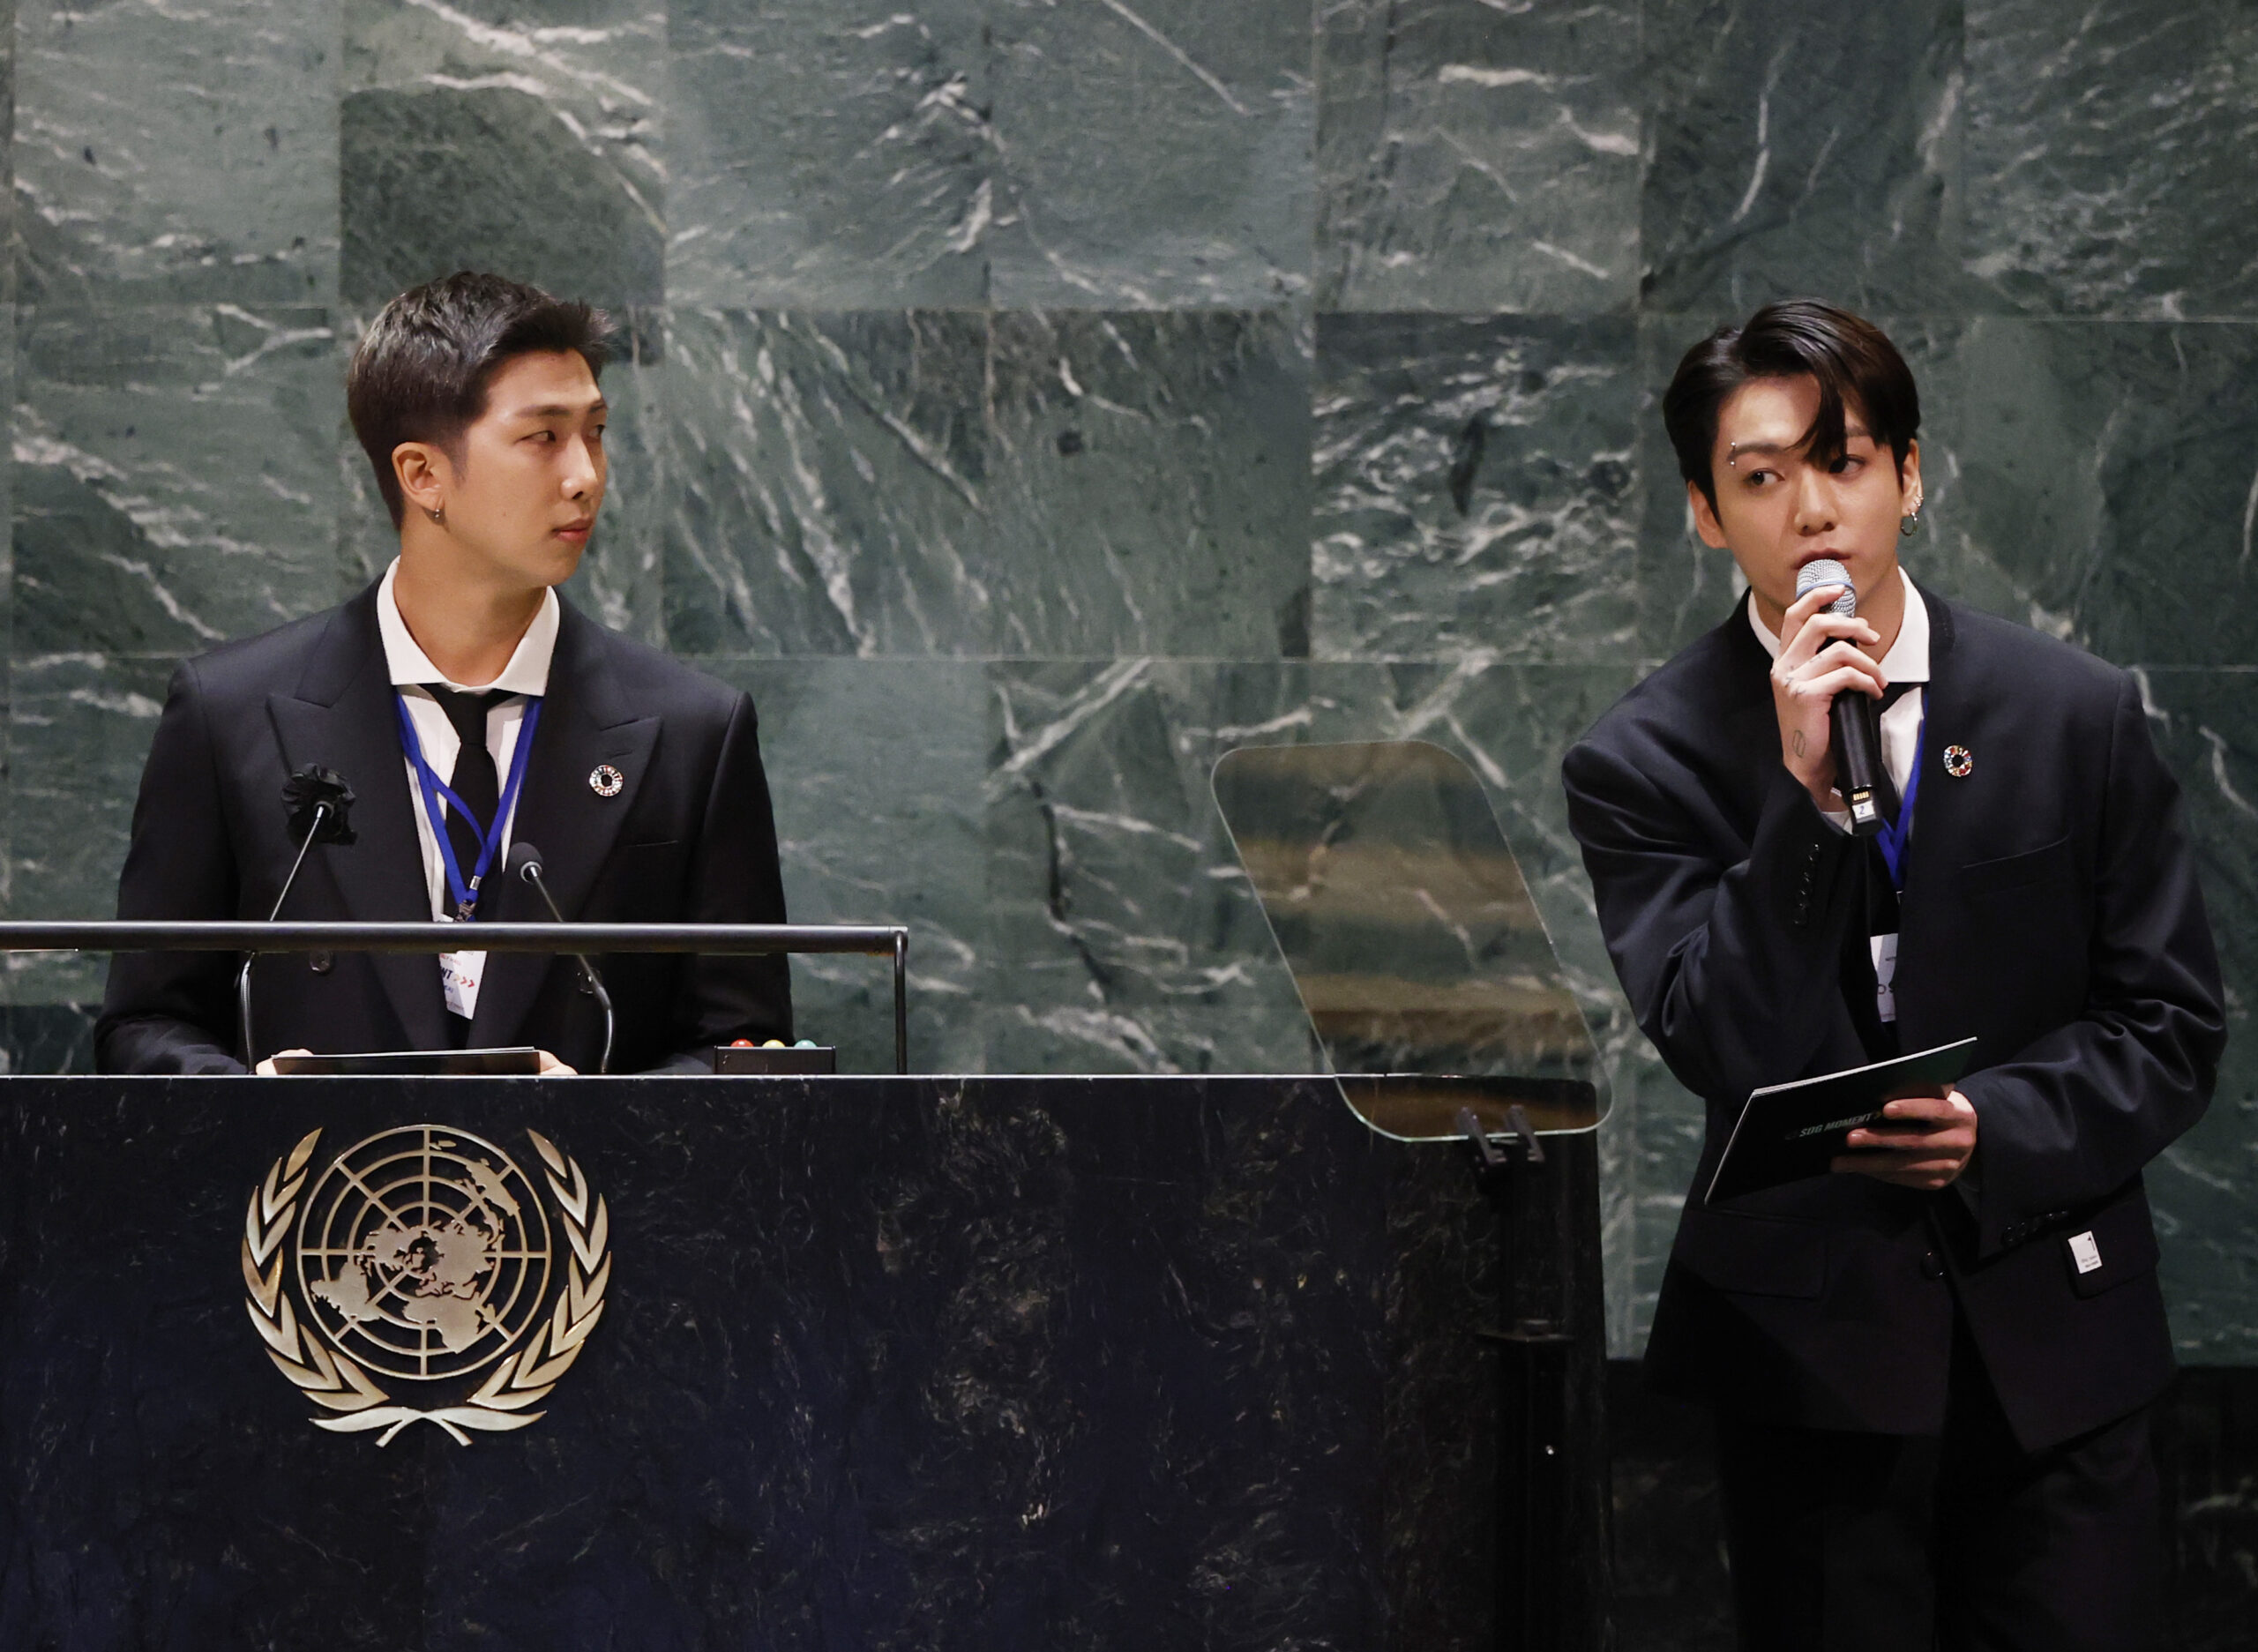 ADDS IDS - Members of South Korean K-pop band BTS, RM, left, and Jung Kook appear at the Sustainable Development Goals meeting during the 76th session of the United Nations General Assembly, at the United Nations Headquarters on Monday, Sept. 20, 2021. (John Angelillo/Pool via AP)